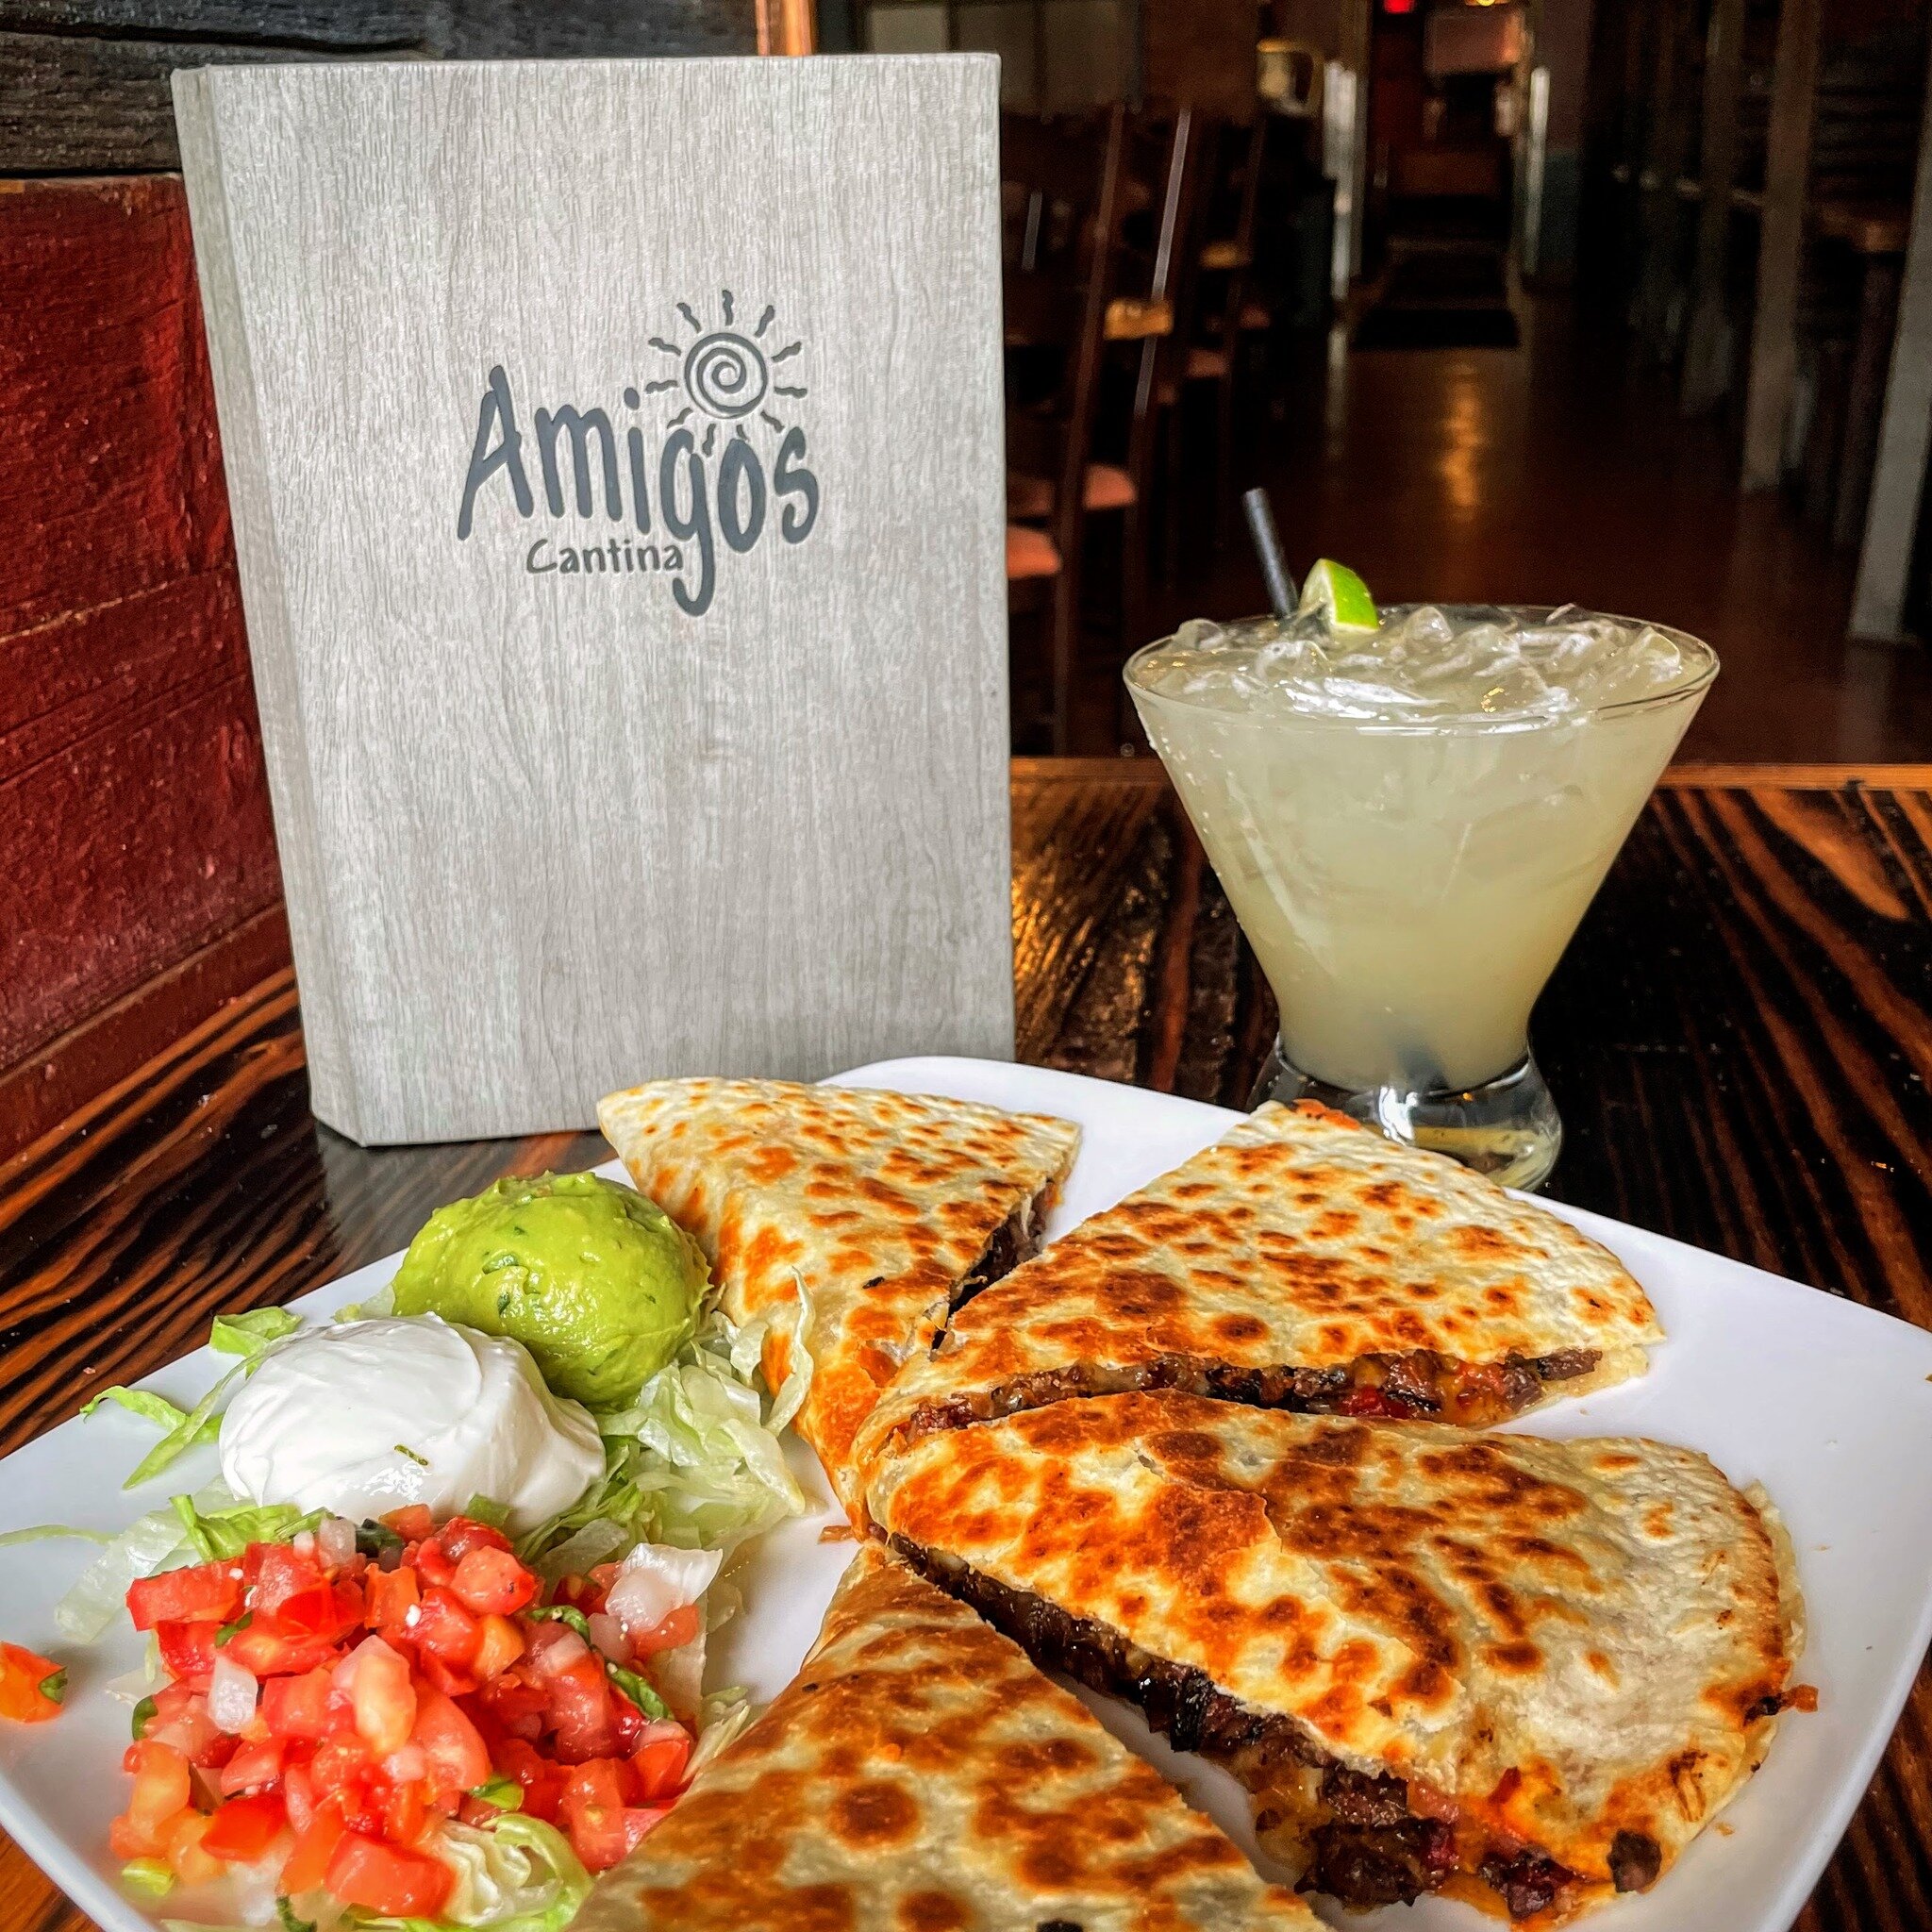 Our quesadillas are packed with flavor and grilled to perfection. They pair perfectly with one of our signature shaken margaritas. With options like tender grilled steak, fajita chicken, spicy Mojo shrimp, and sauteed portabella mushrooms you're sure